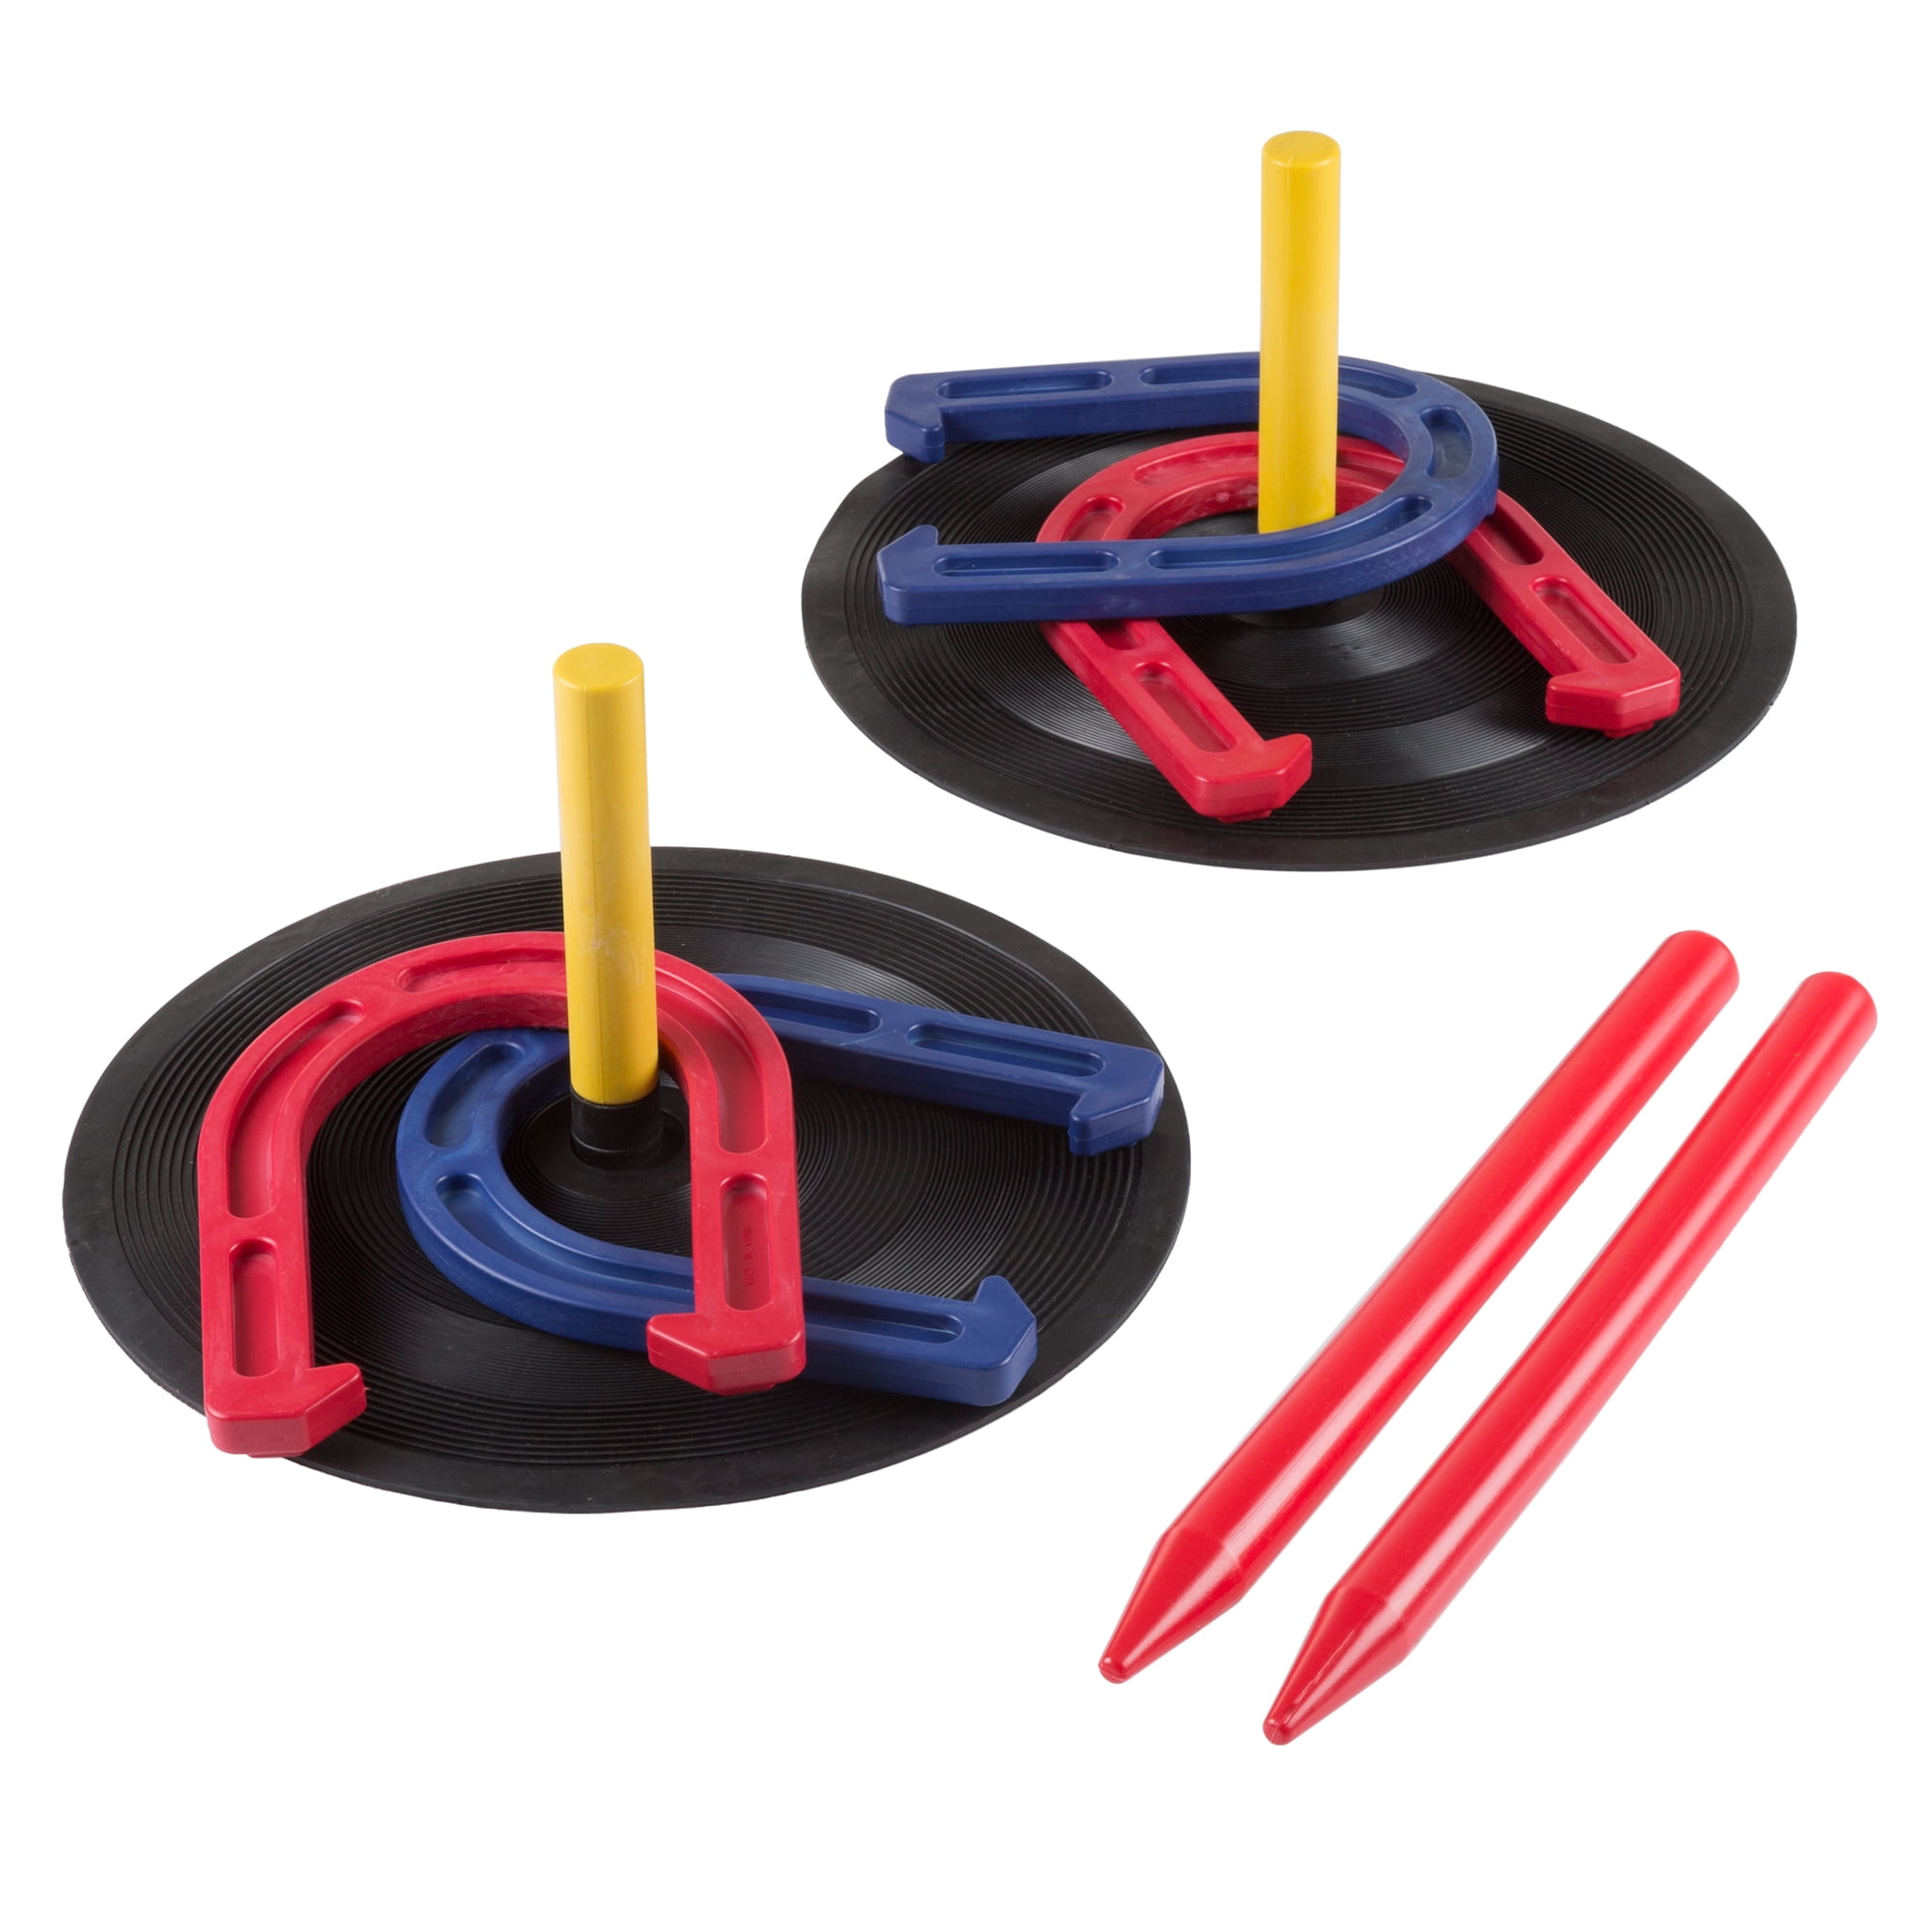 Win SPORTS Outdoor Indoor Rubber Horseshoes Set Includes 4 Horseshoes,2 Pegs,2 Rubber Mats,2 Red Plastic dowels,Beach Games Perfect for Tailgating,Camping,Backyard,Fun for Kids Adults 